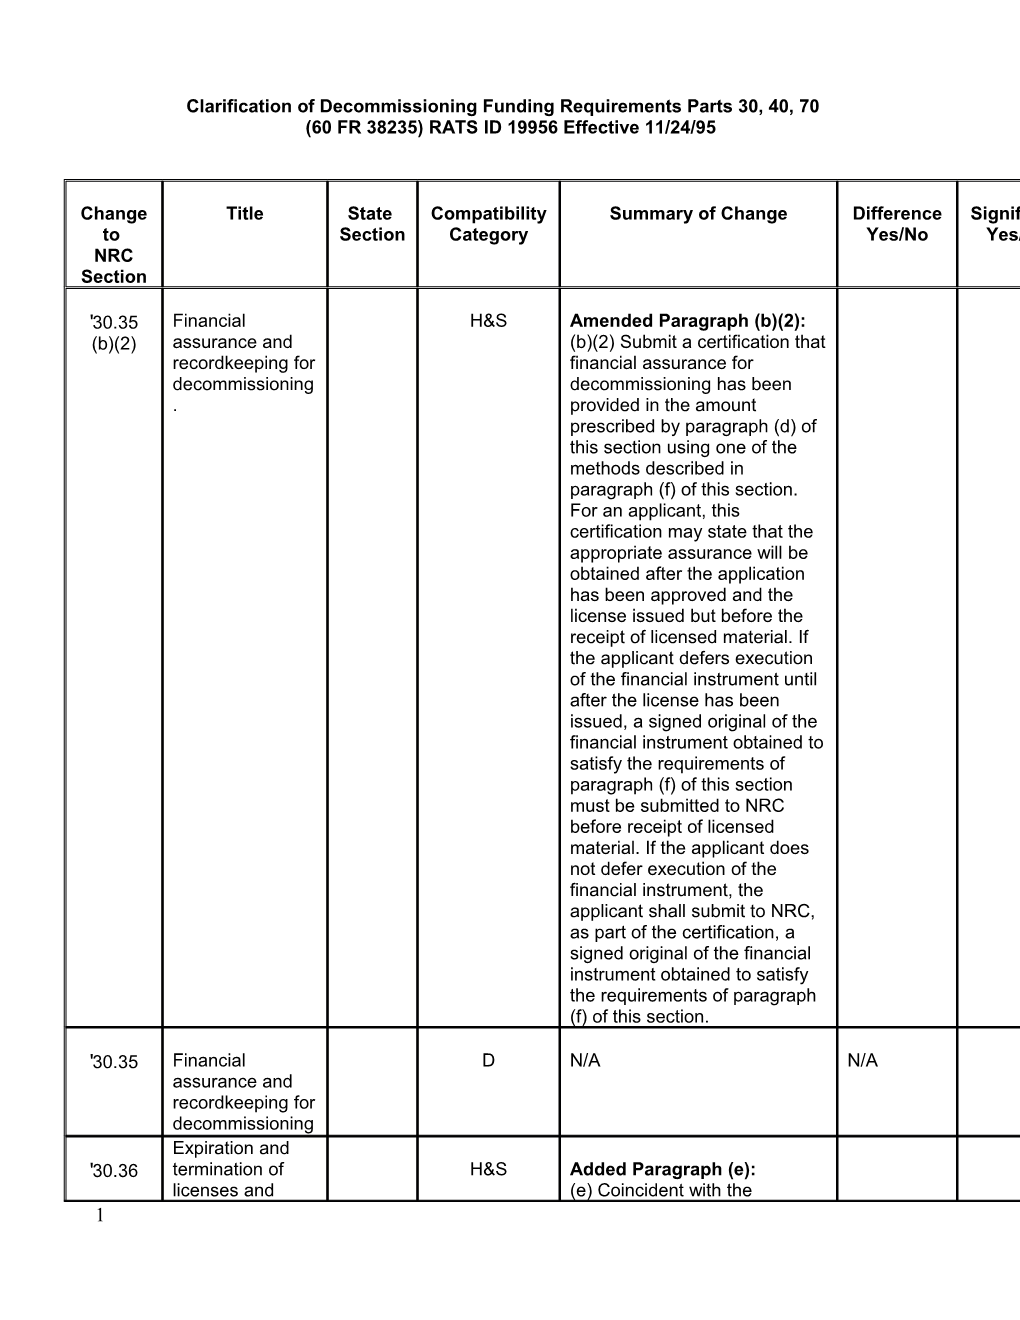 Clarification of Decommissioning Funding Requirements Parts 30,40,70